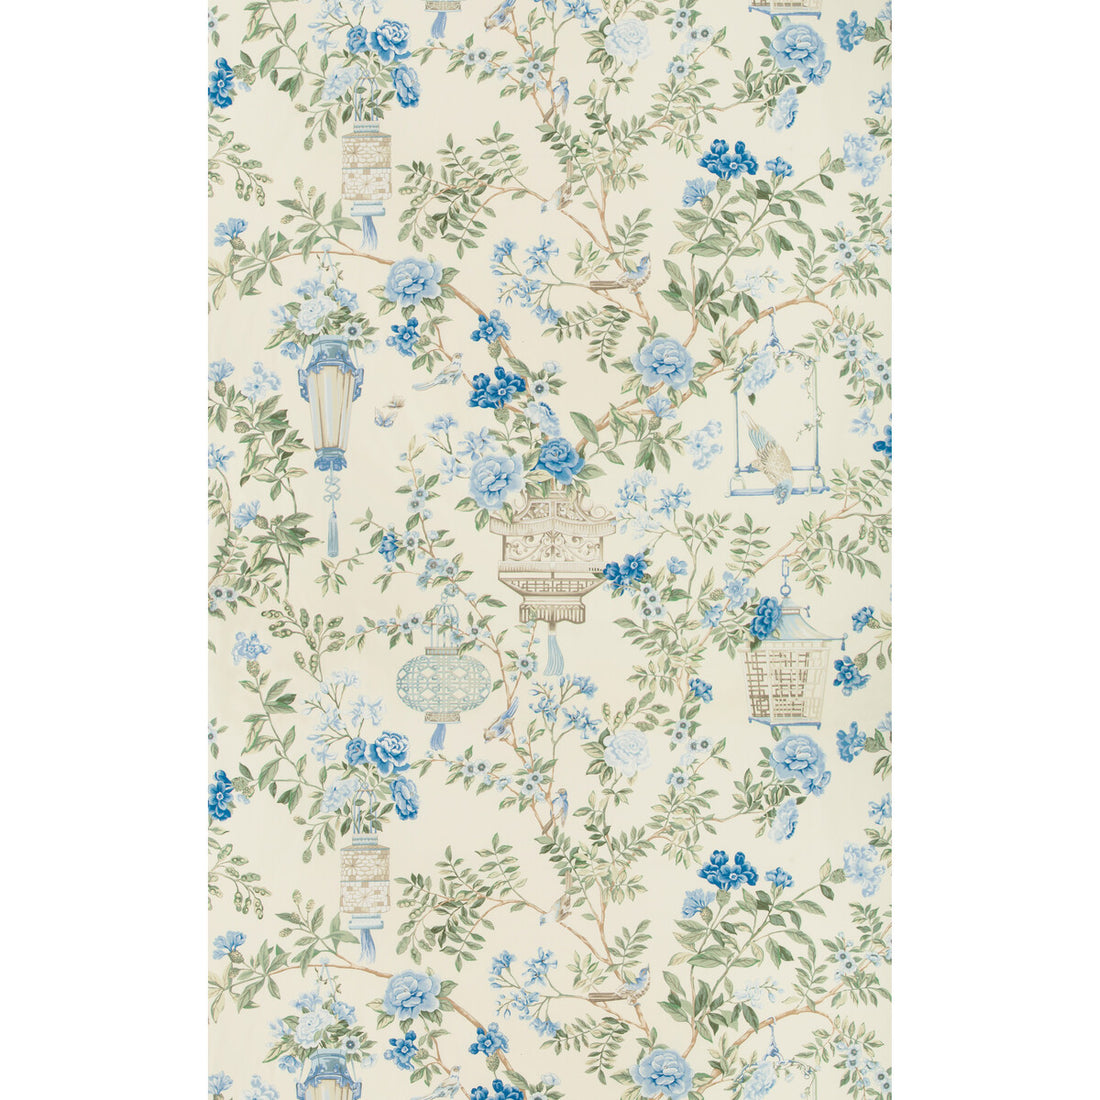 Jardin Fleuri Print fabric in delft color - pattern 8019137.153.0 - by Brunschwig &amp; Fils in the Summer Palace collection